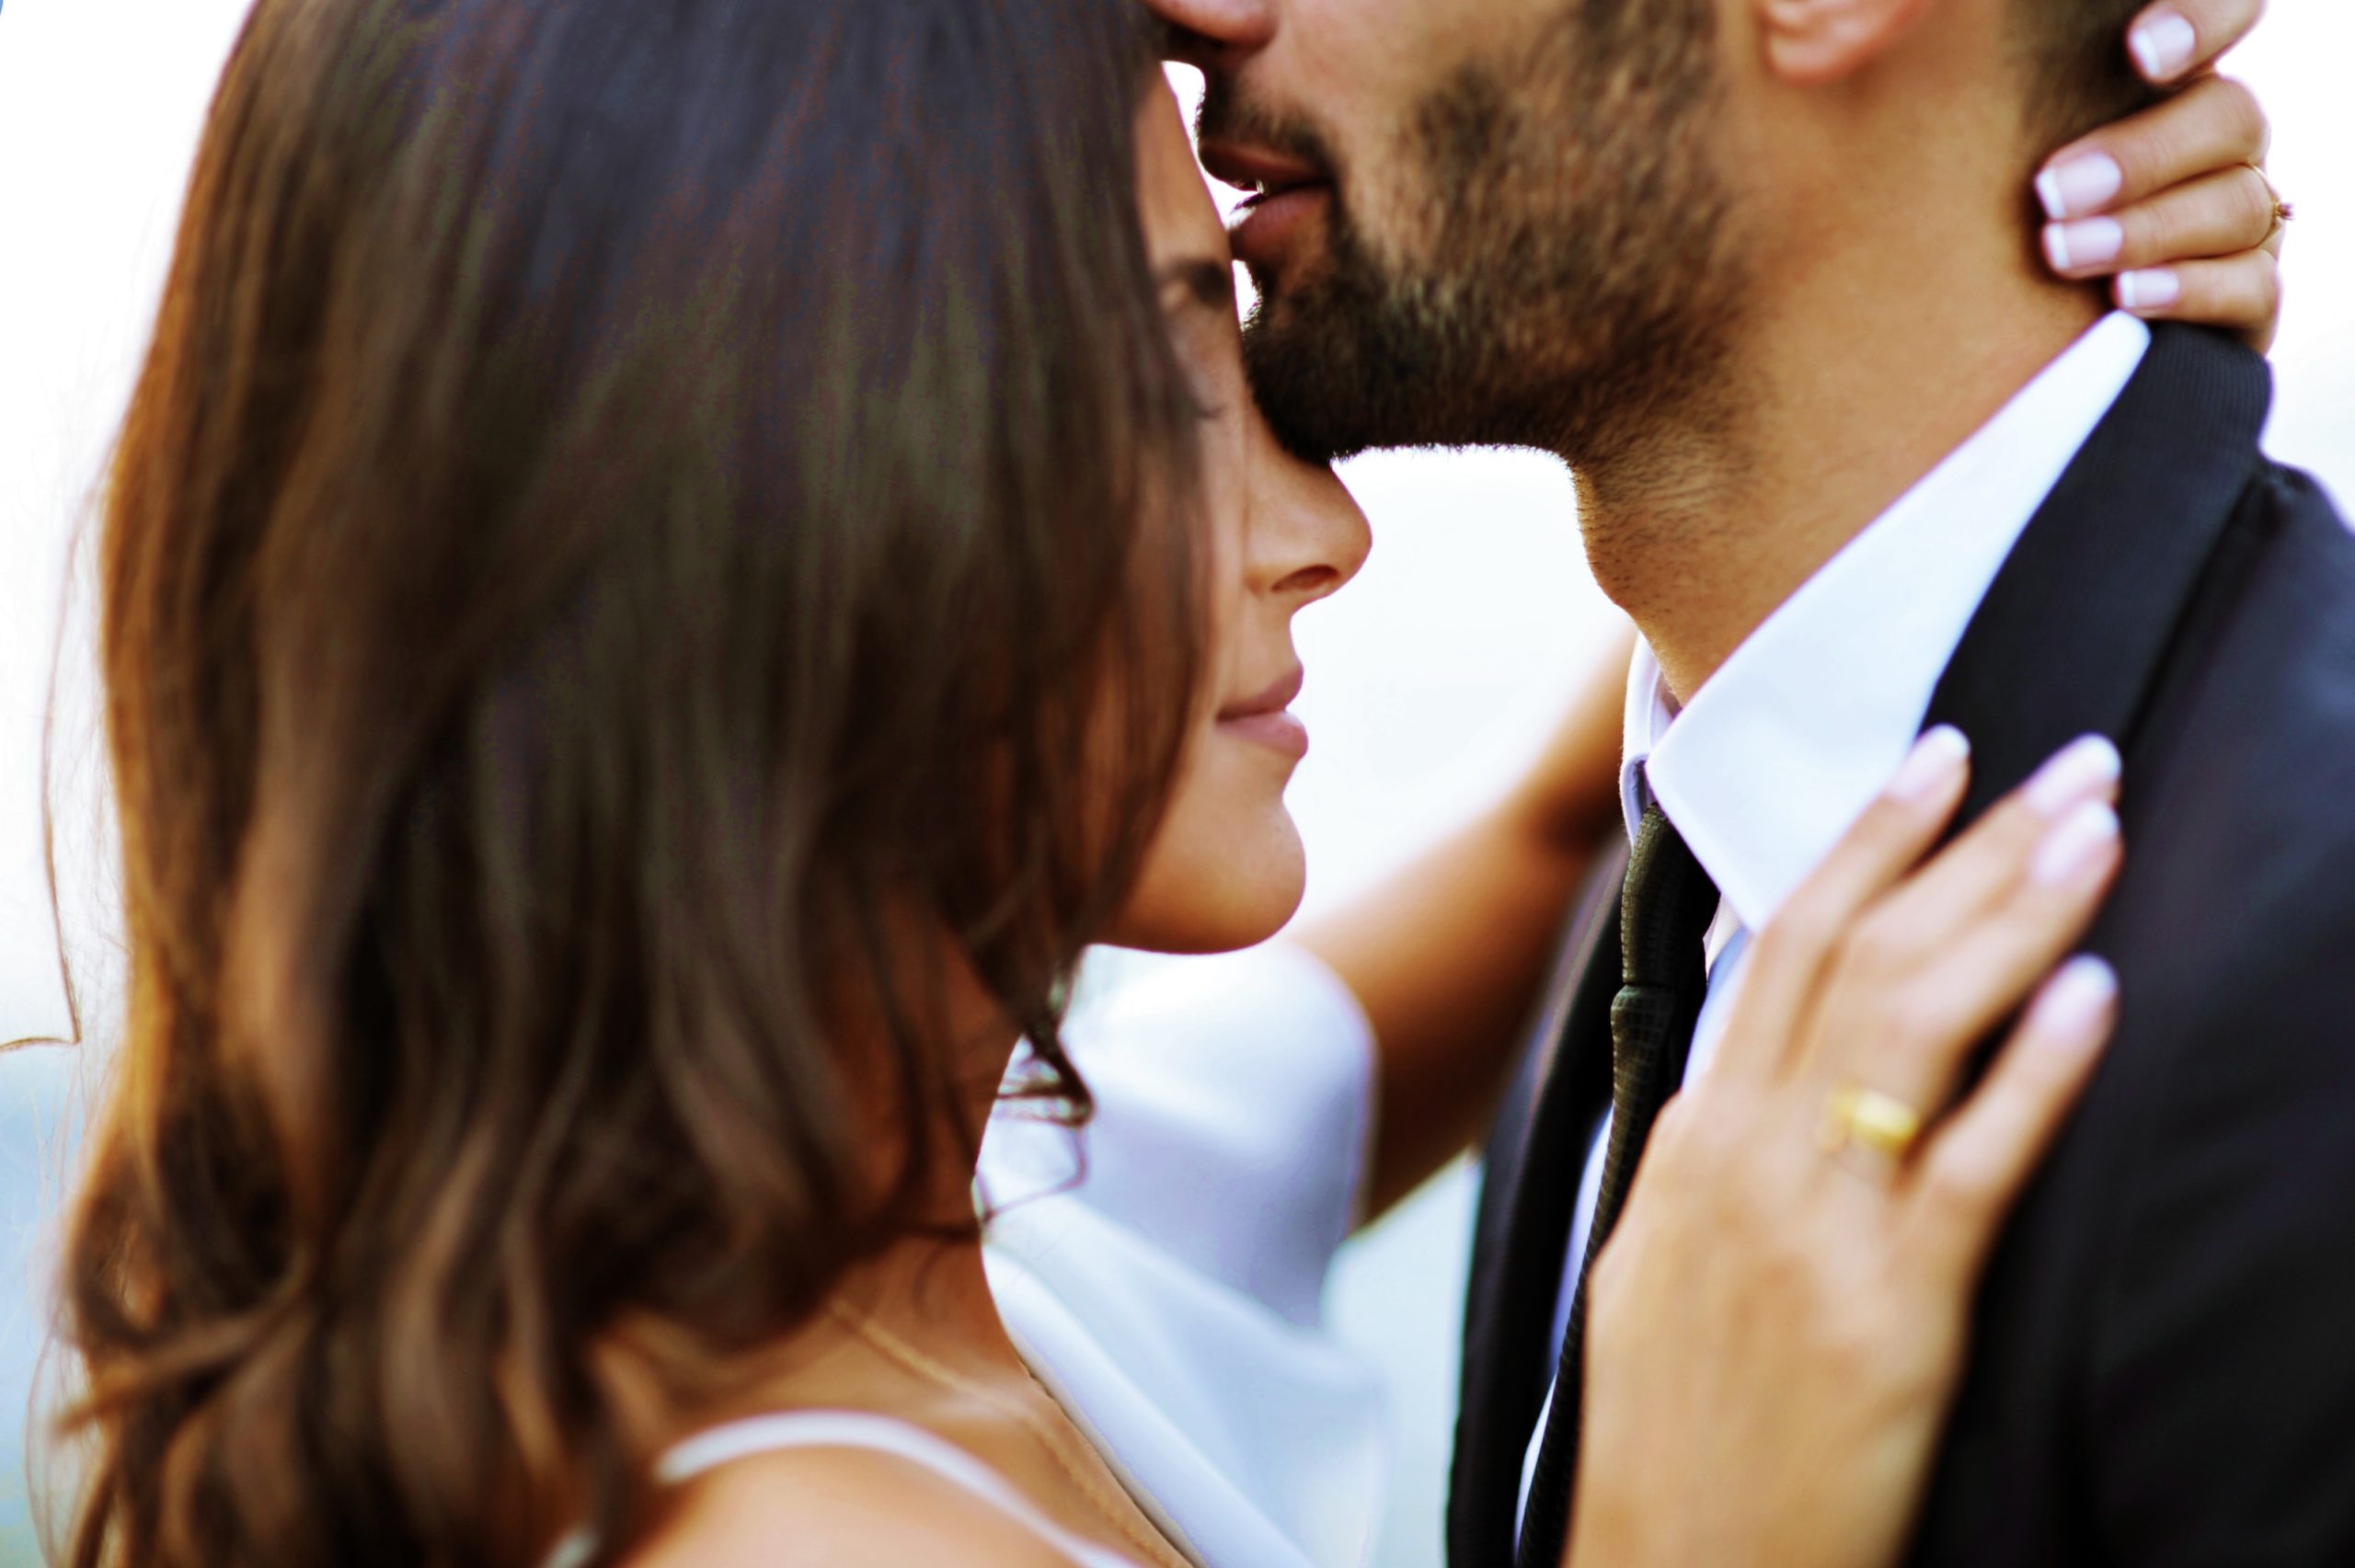 A closeup of a man kissing a woman's forehead as they embrace.